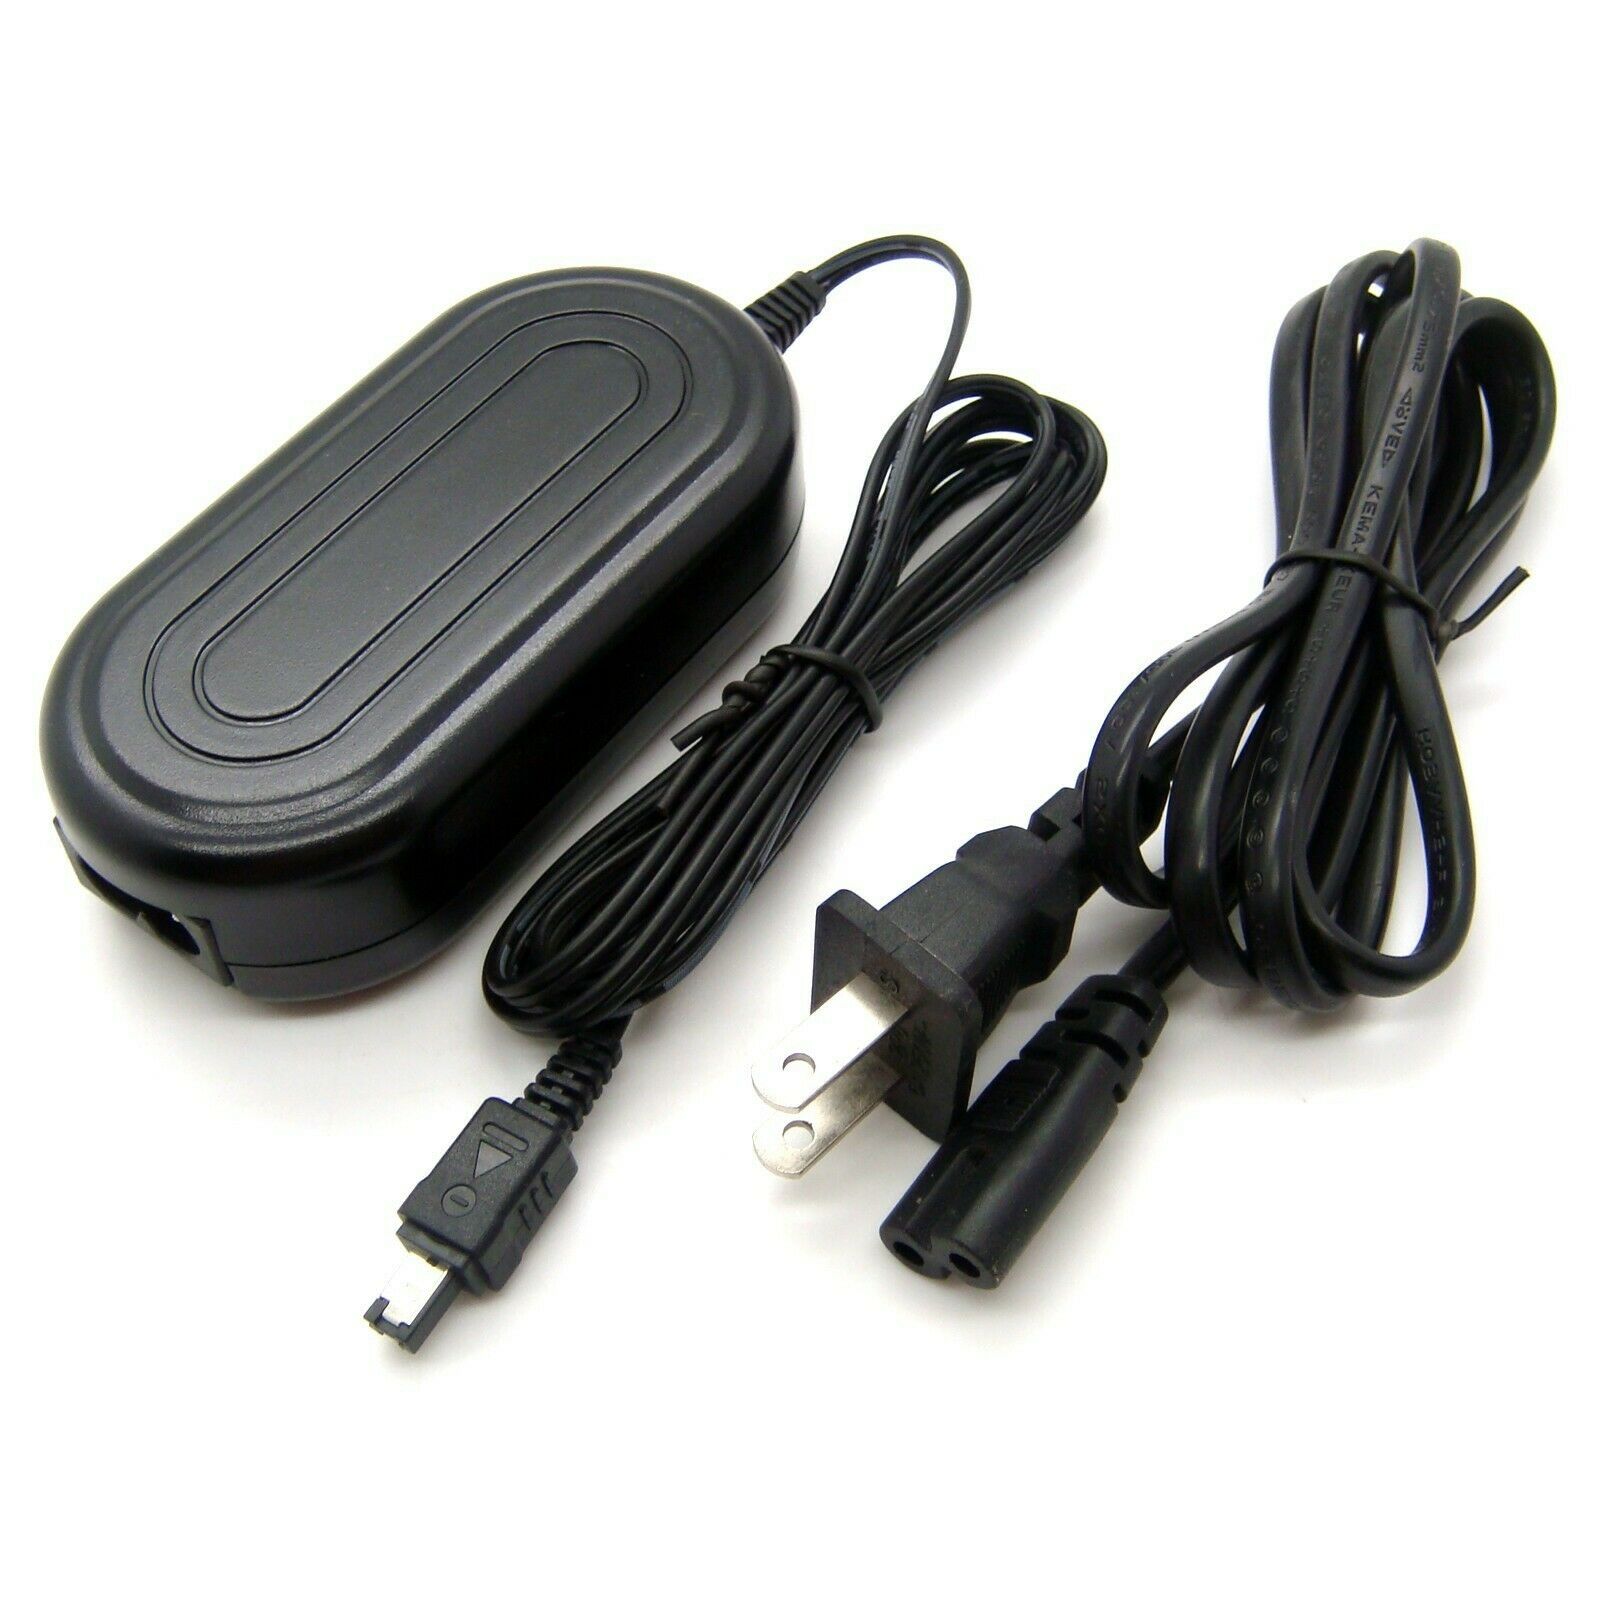 JVC GR-D366 Ac Adapter Power Supply Cord Cable Charger